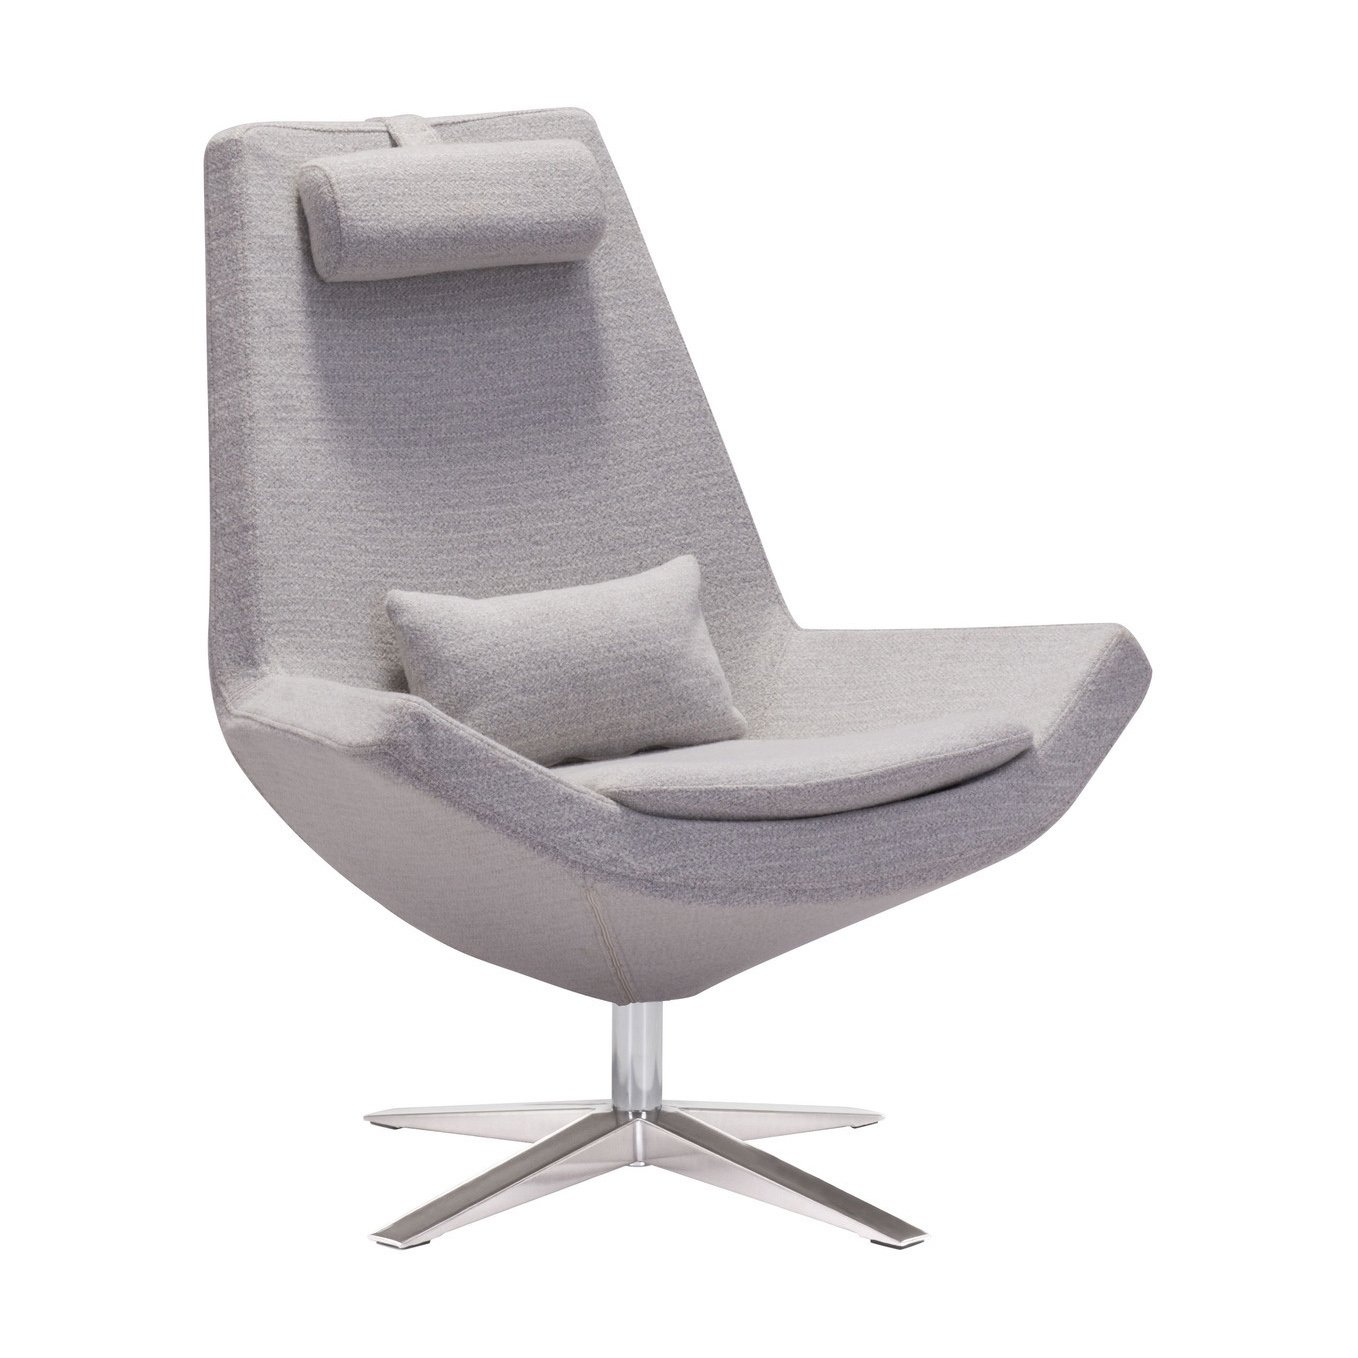 bruges occasional chair - light gray